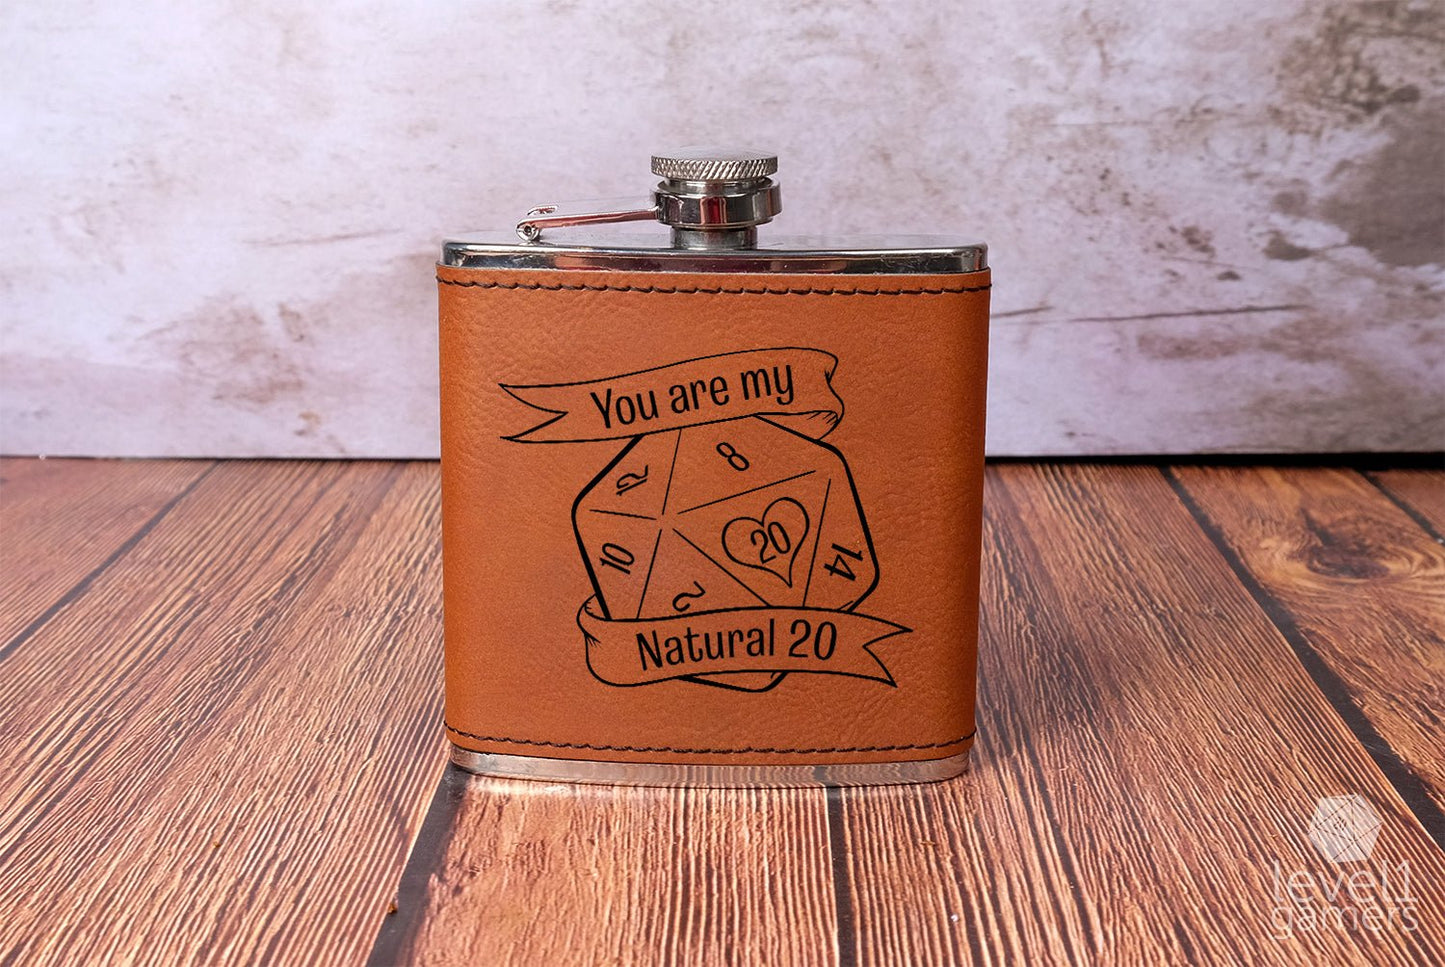 You Are My Natural 20 Flask  Level 1 Gamers   